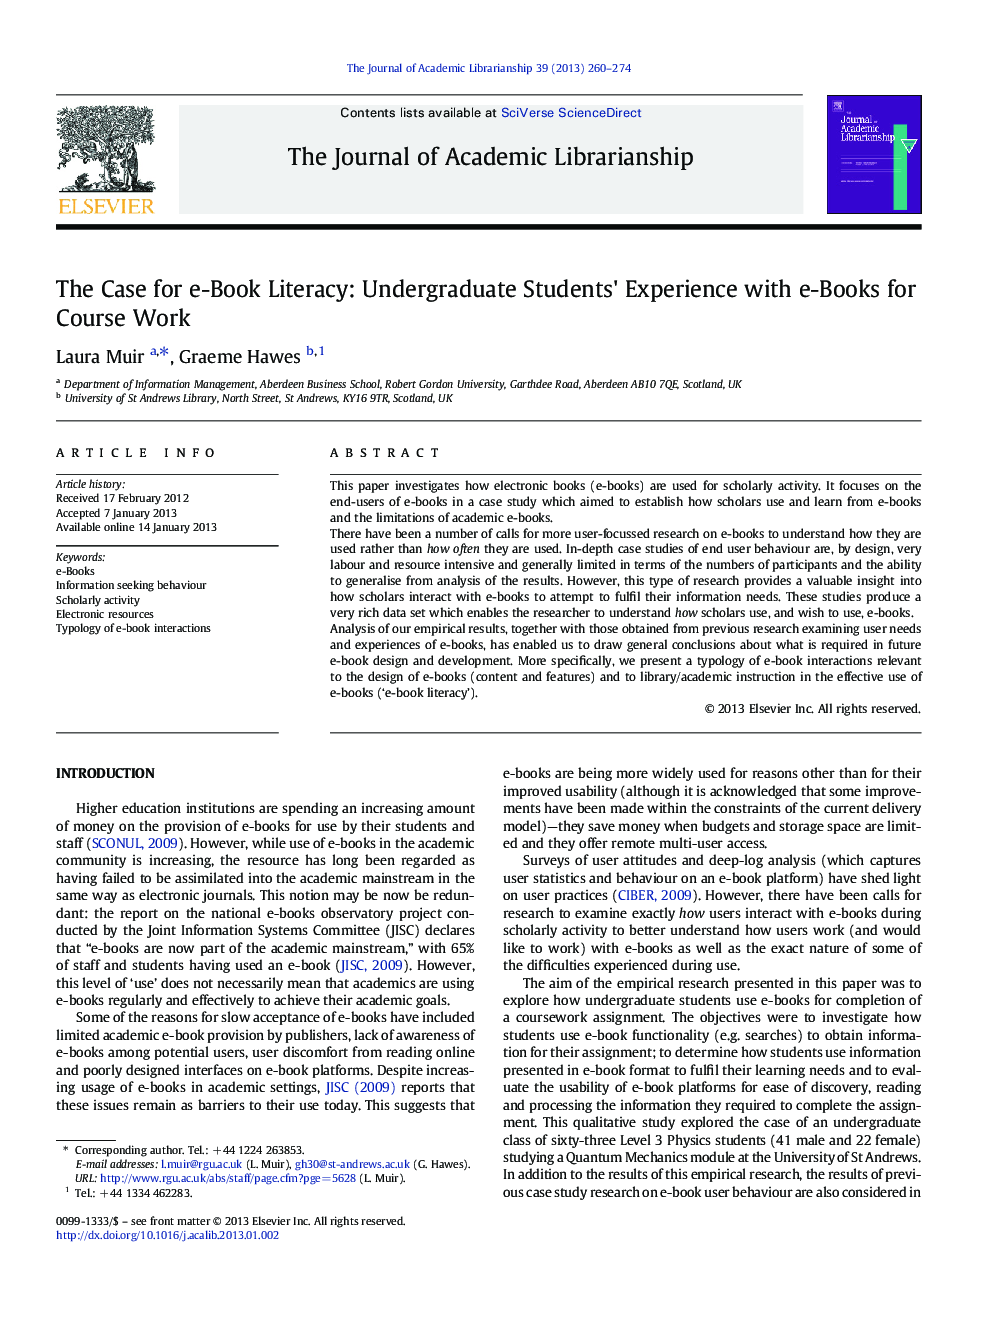 The Case for e-Book Literacy: Undergraduate Students' Experience with e-Books for Course Work